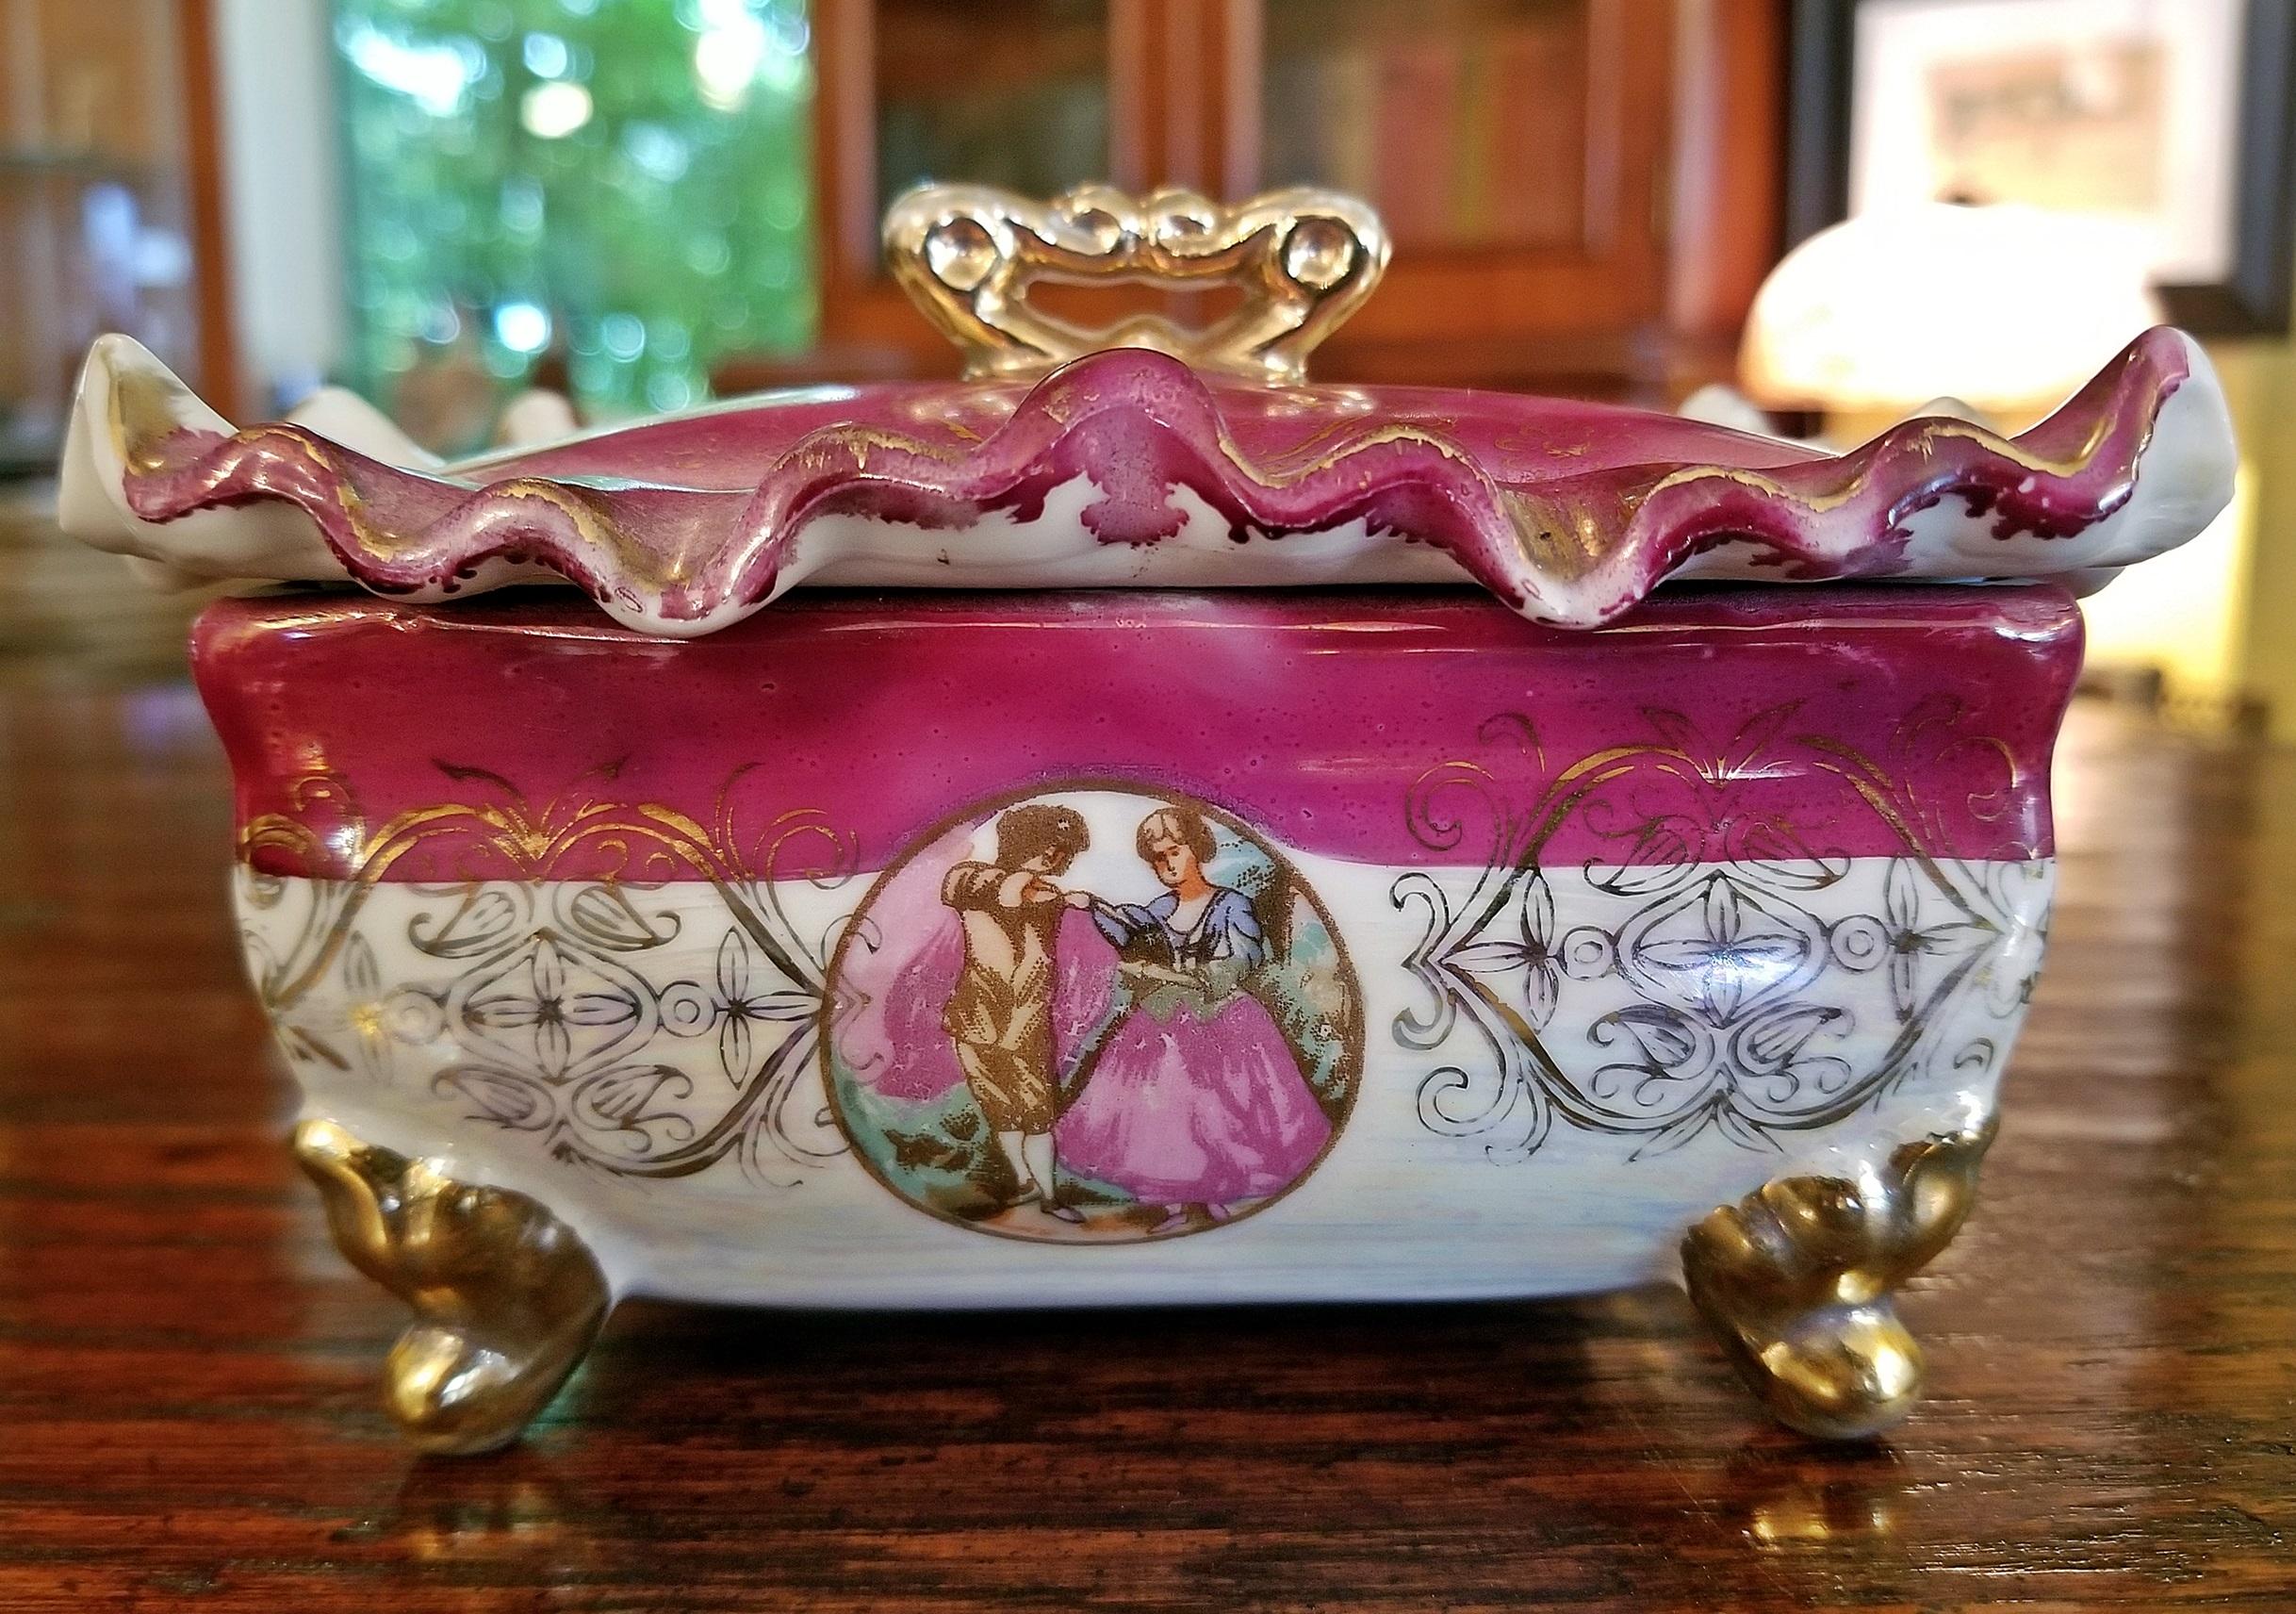 Nice vintage French Limoges style lustre porcelain box with lid.

Purple and white in color with rippled edging and with gold gilding to handle and legs.

Lady and gent scenes.

Probably late 19th century, circa 1890.

No marks.

Very